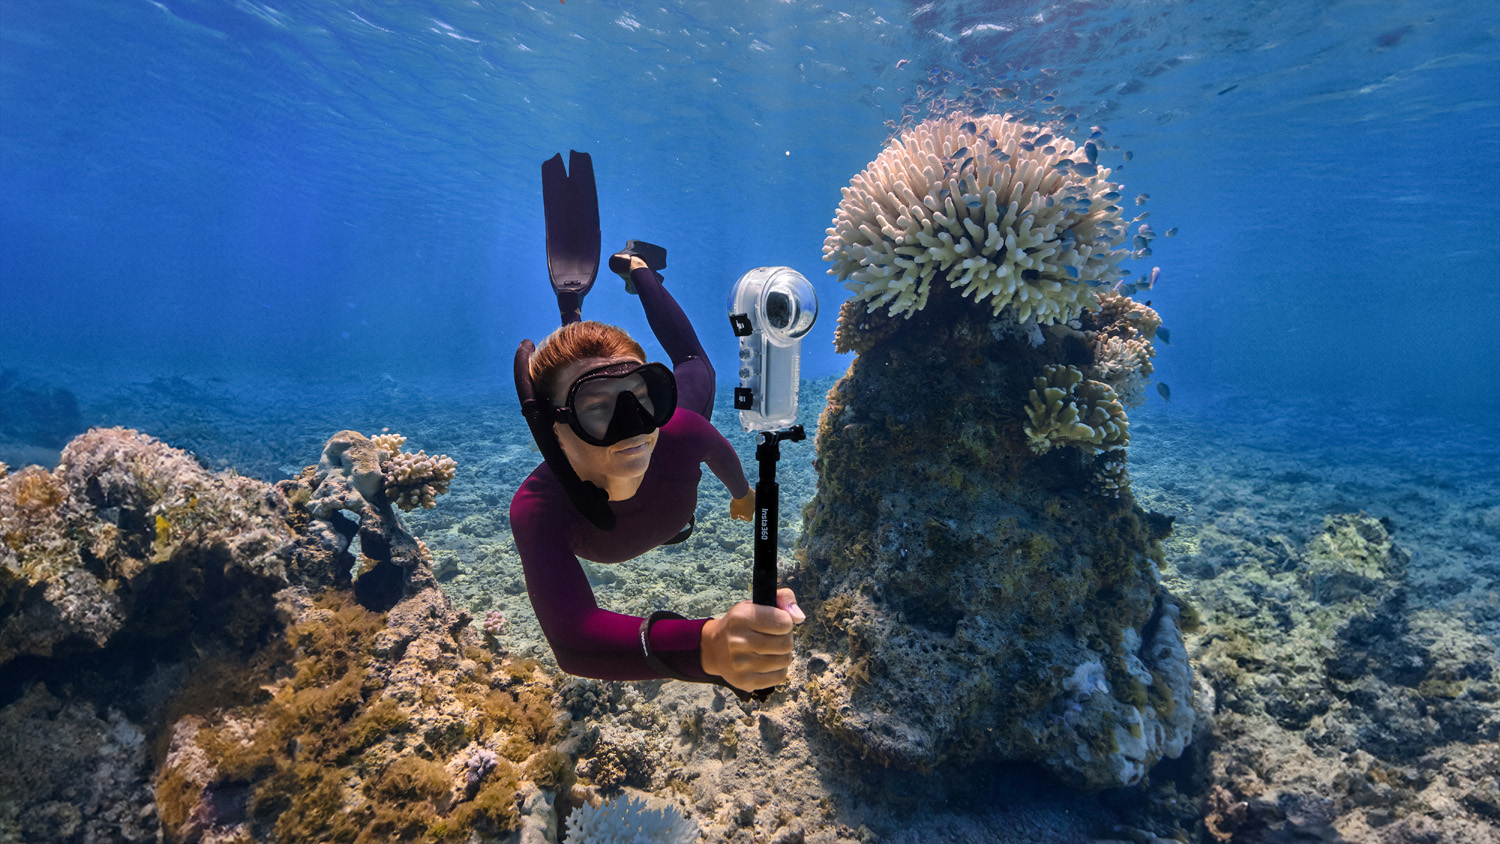 An underwater scene with a diver, wearing a mask, snorkel, and wetsuit, swimming next to a coral formation and holding a 360-degree camera mounted on a stick.